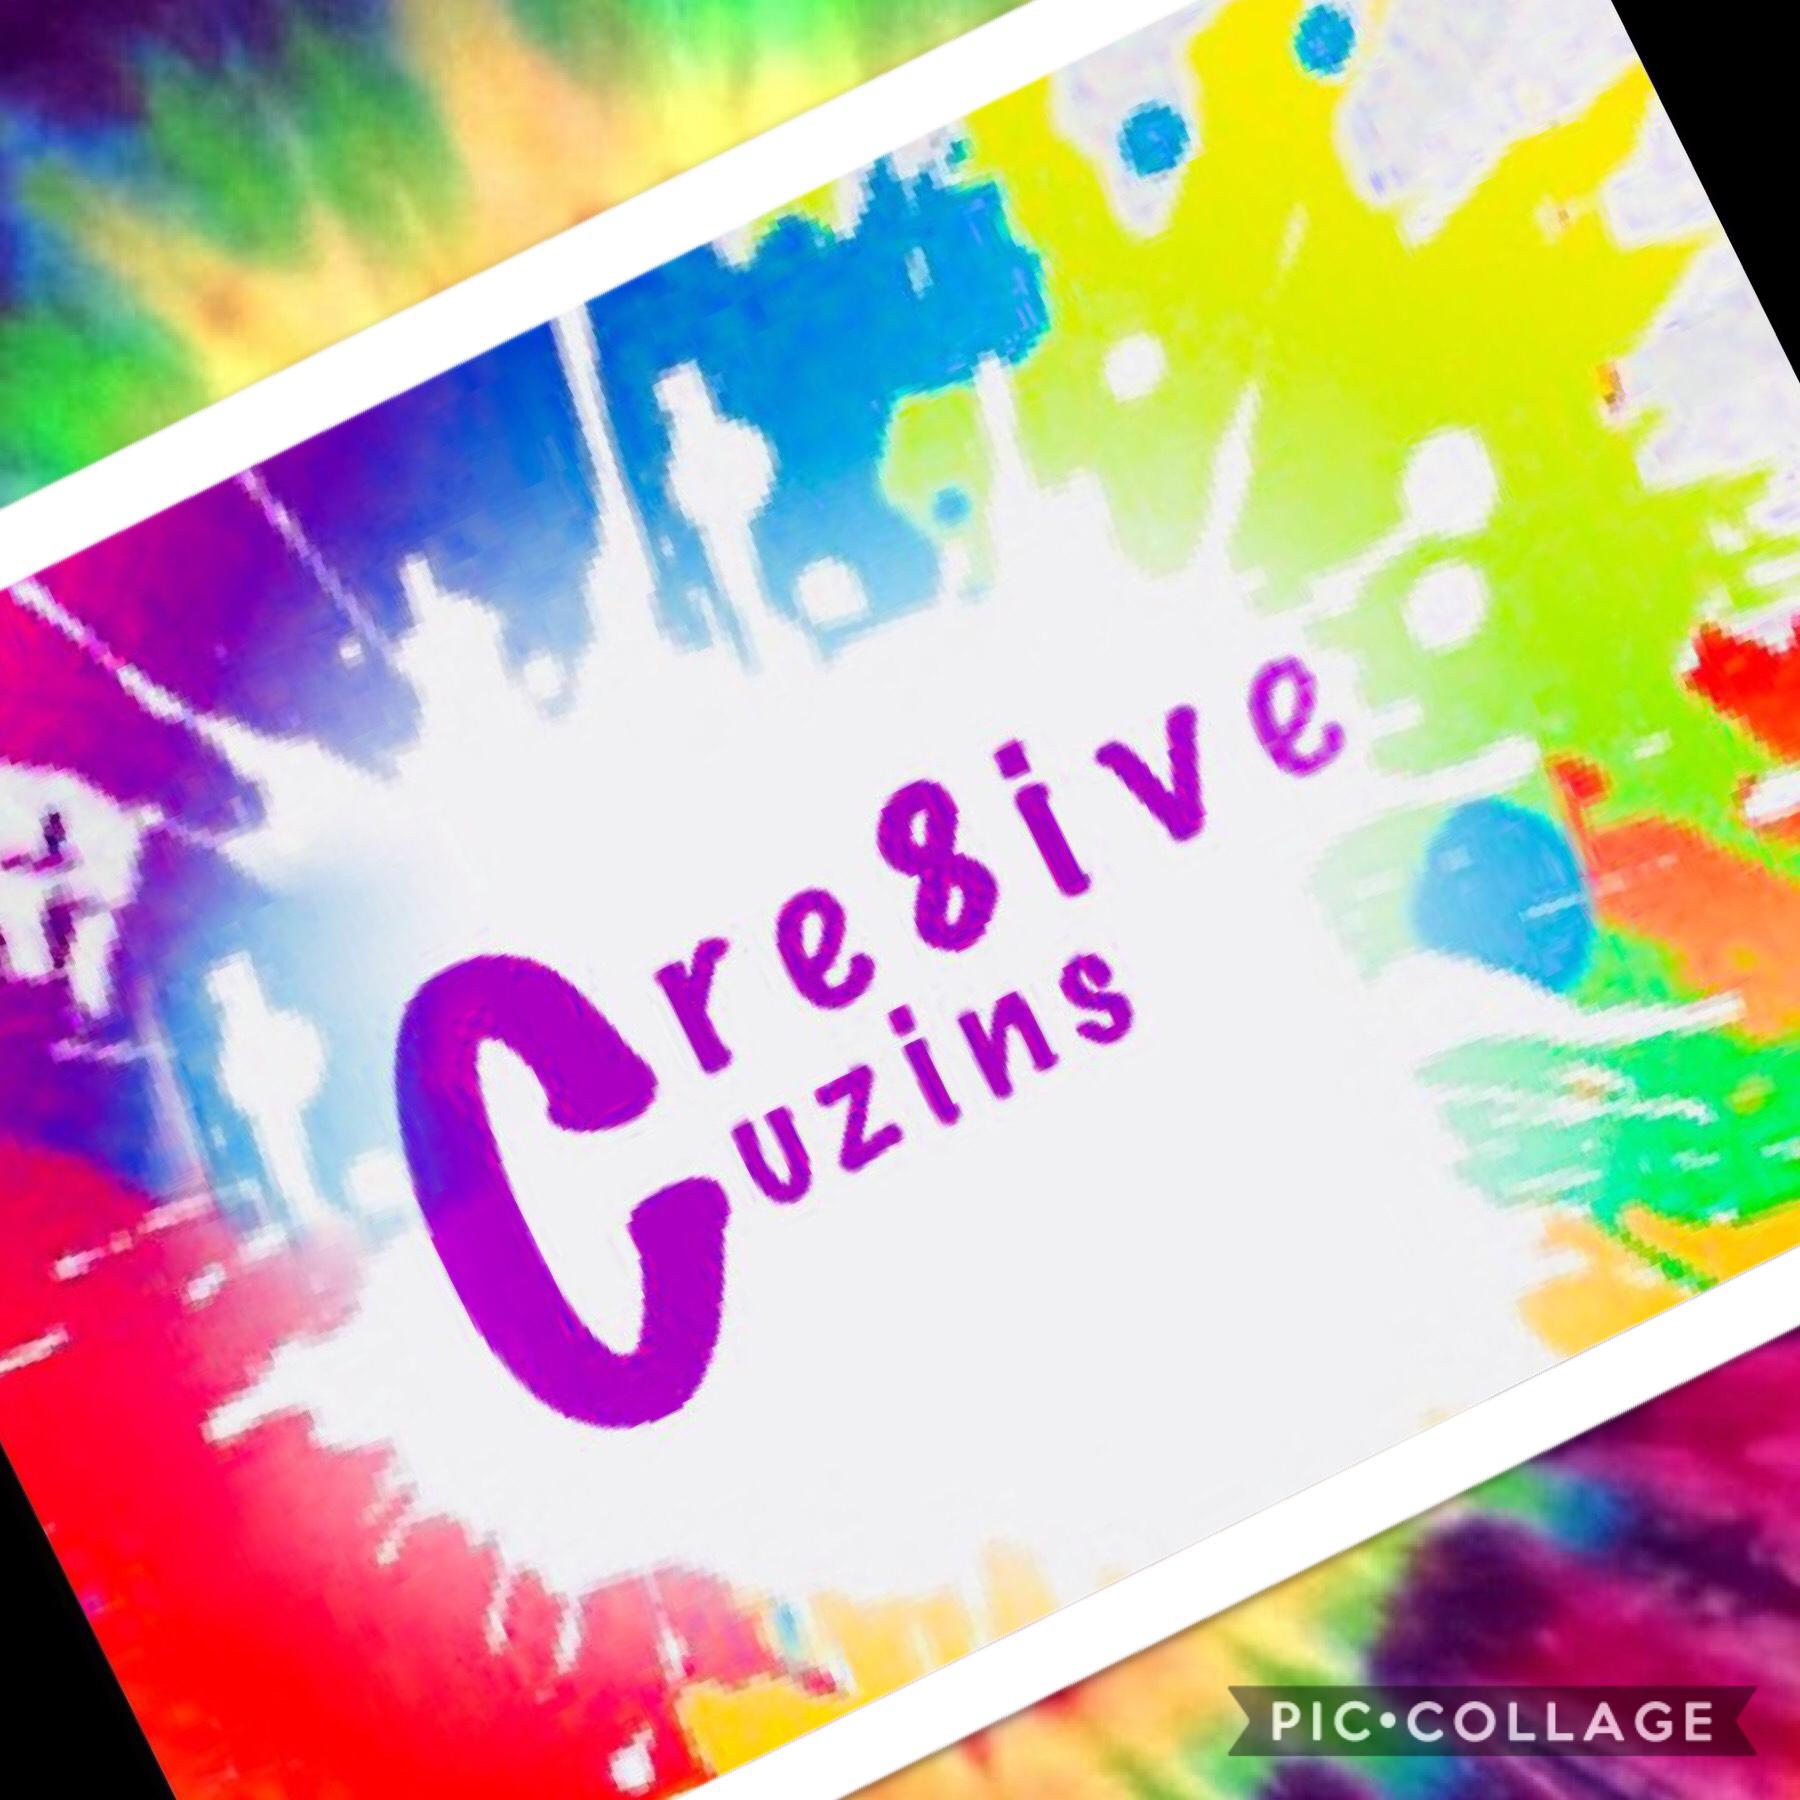 Hey guys so me and my cousins just opened up a tie die business. I will be posting more info if you want to know. You will be able to order on our website. Again I will post that later. Love y'all 
